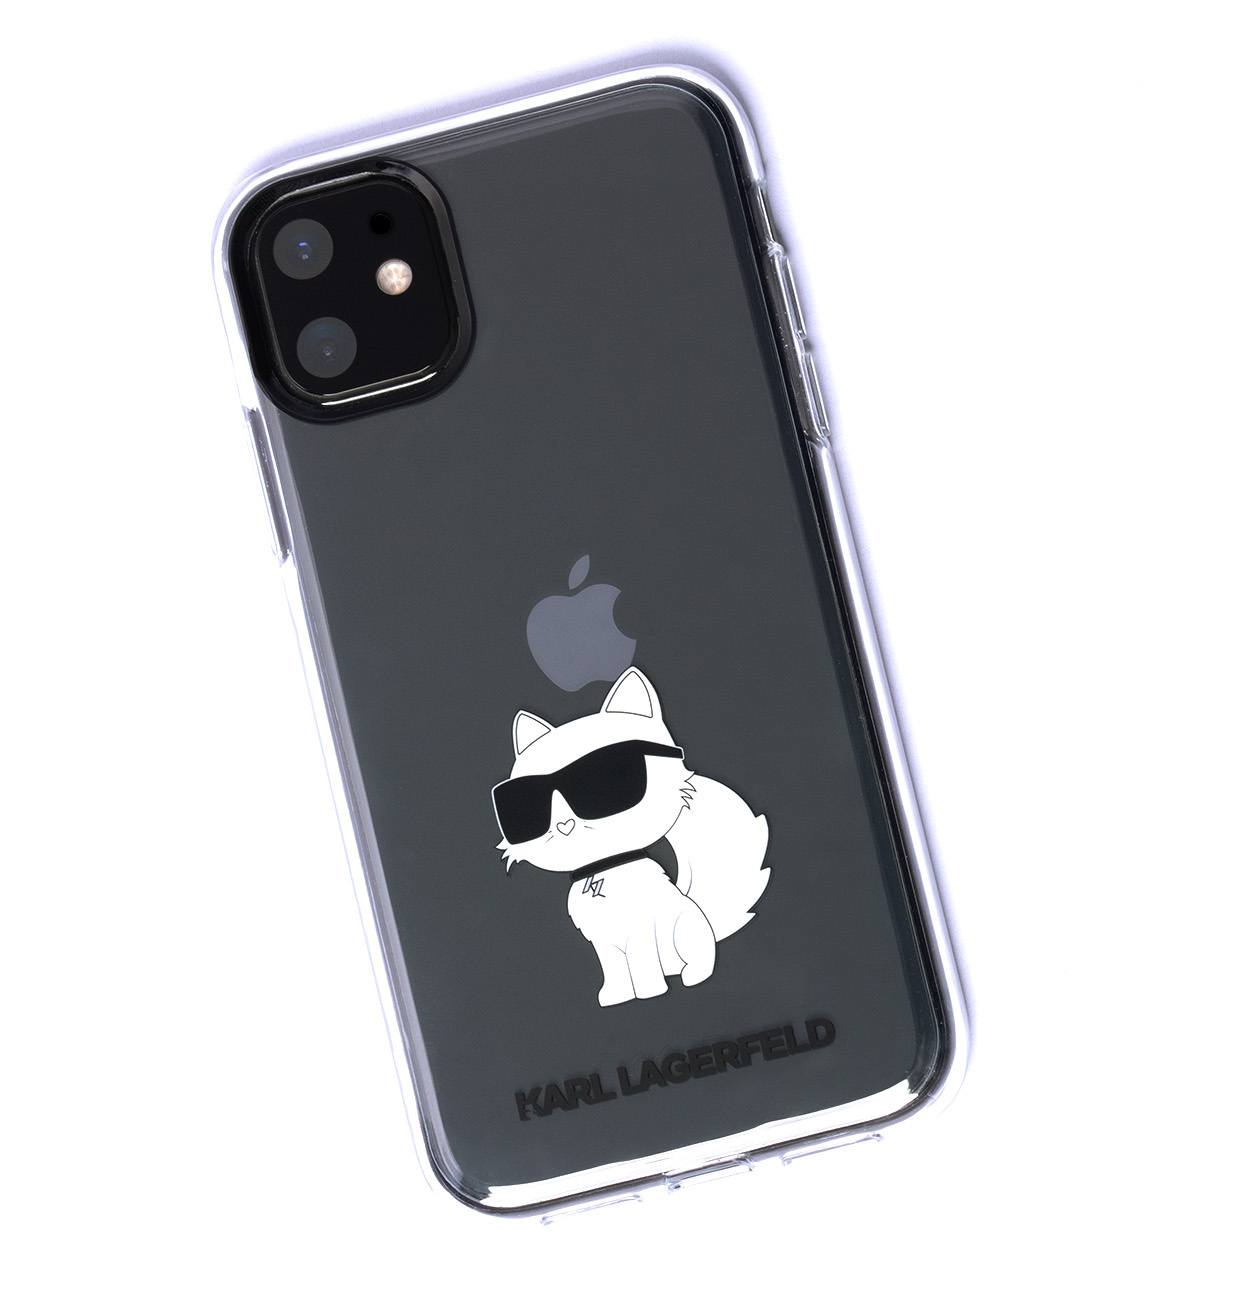 Karl Lagerfeld cat case for iPhone 11 / XR from the Ikonik Choupette series